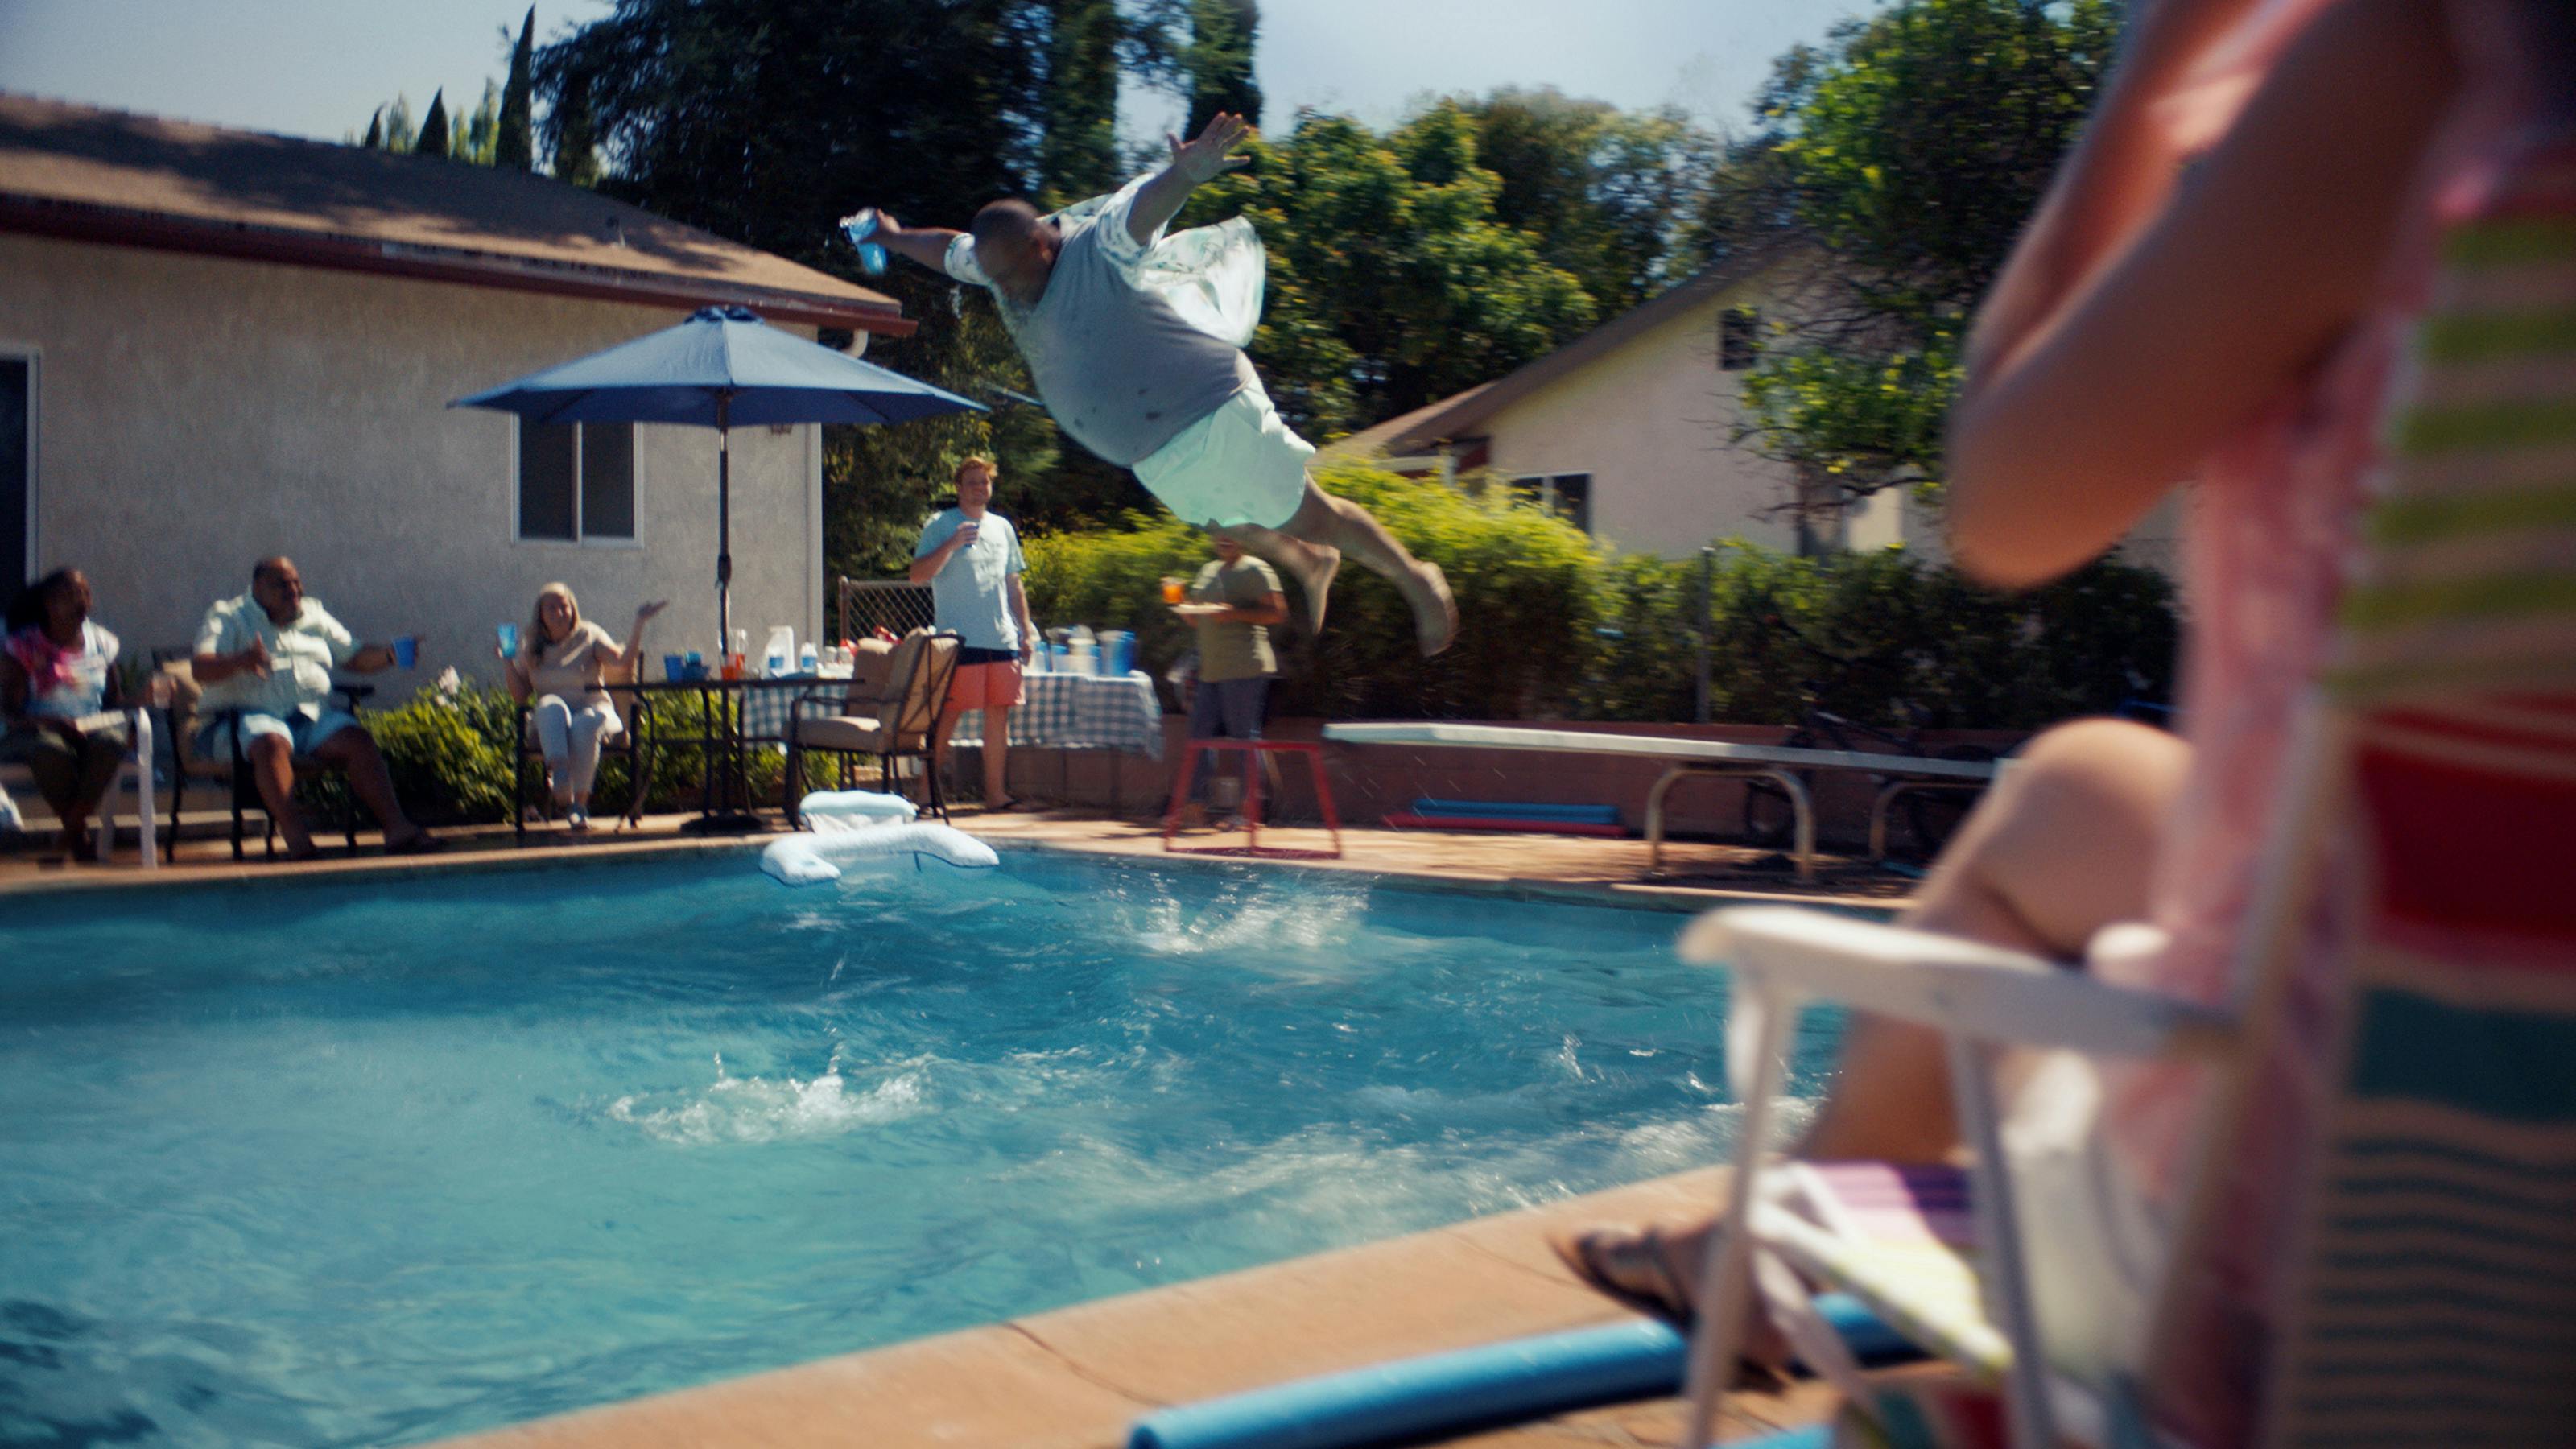 Screen grab of fully-clothed man caught mid-air as he plunges into the swimming pool while others look on.